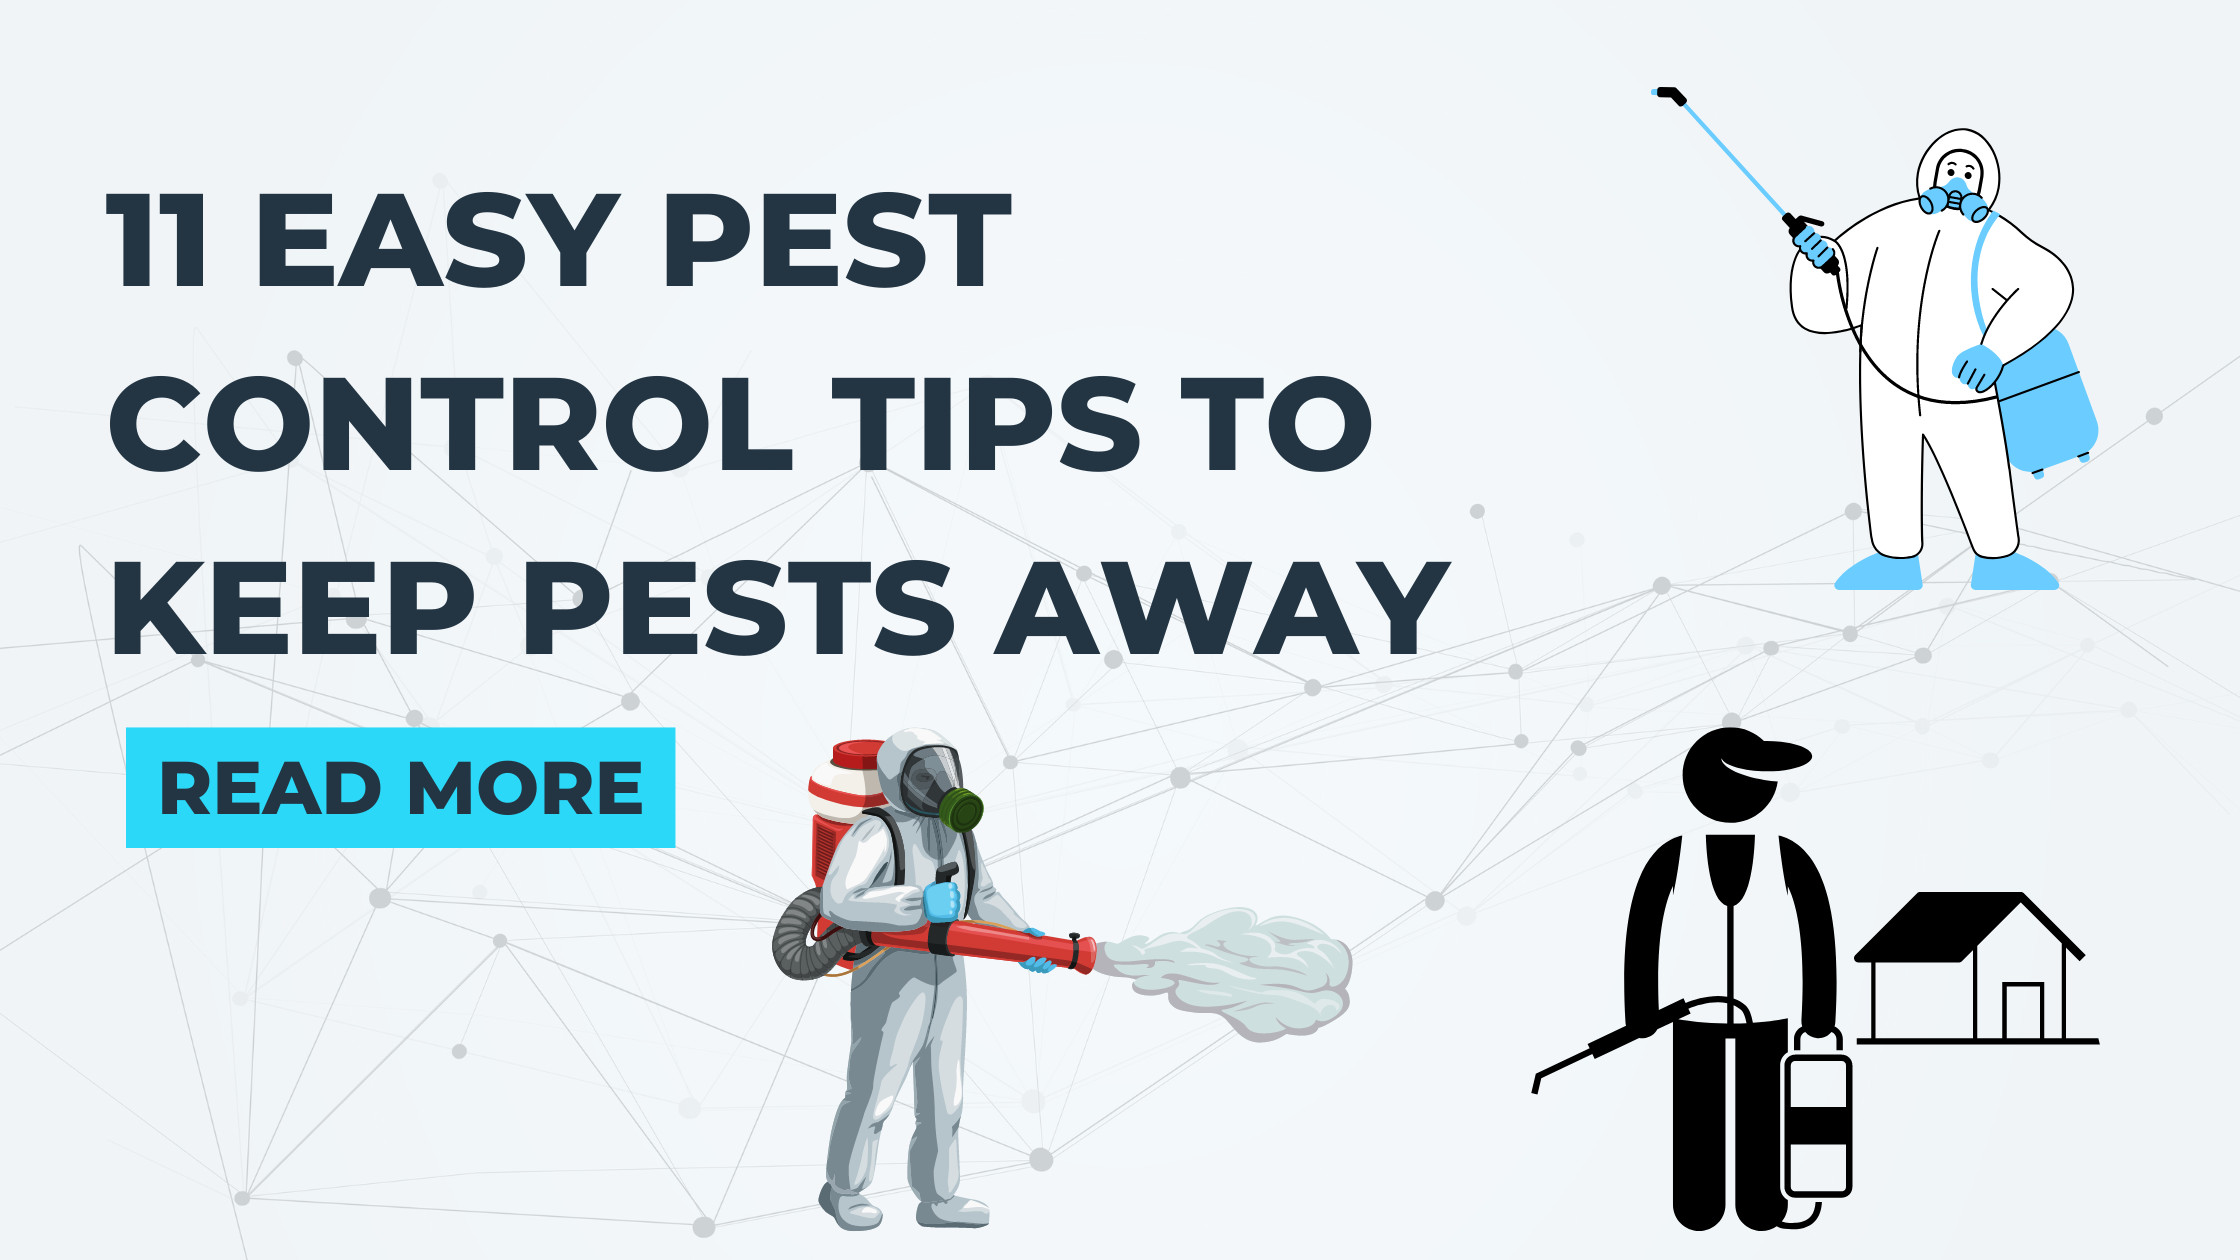 11 Easy Pest Control Tips to Keep Pests Away